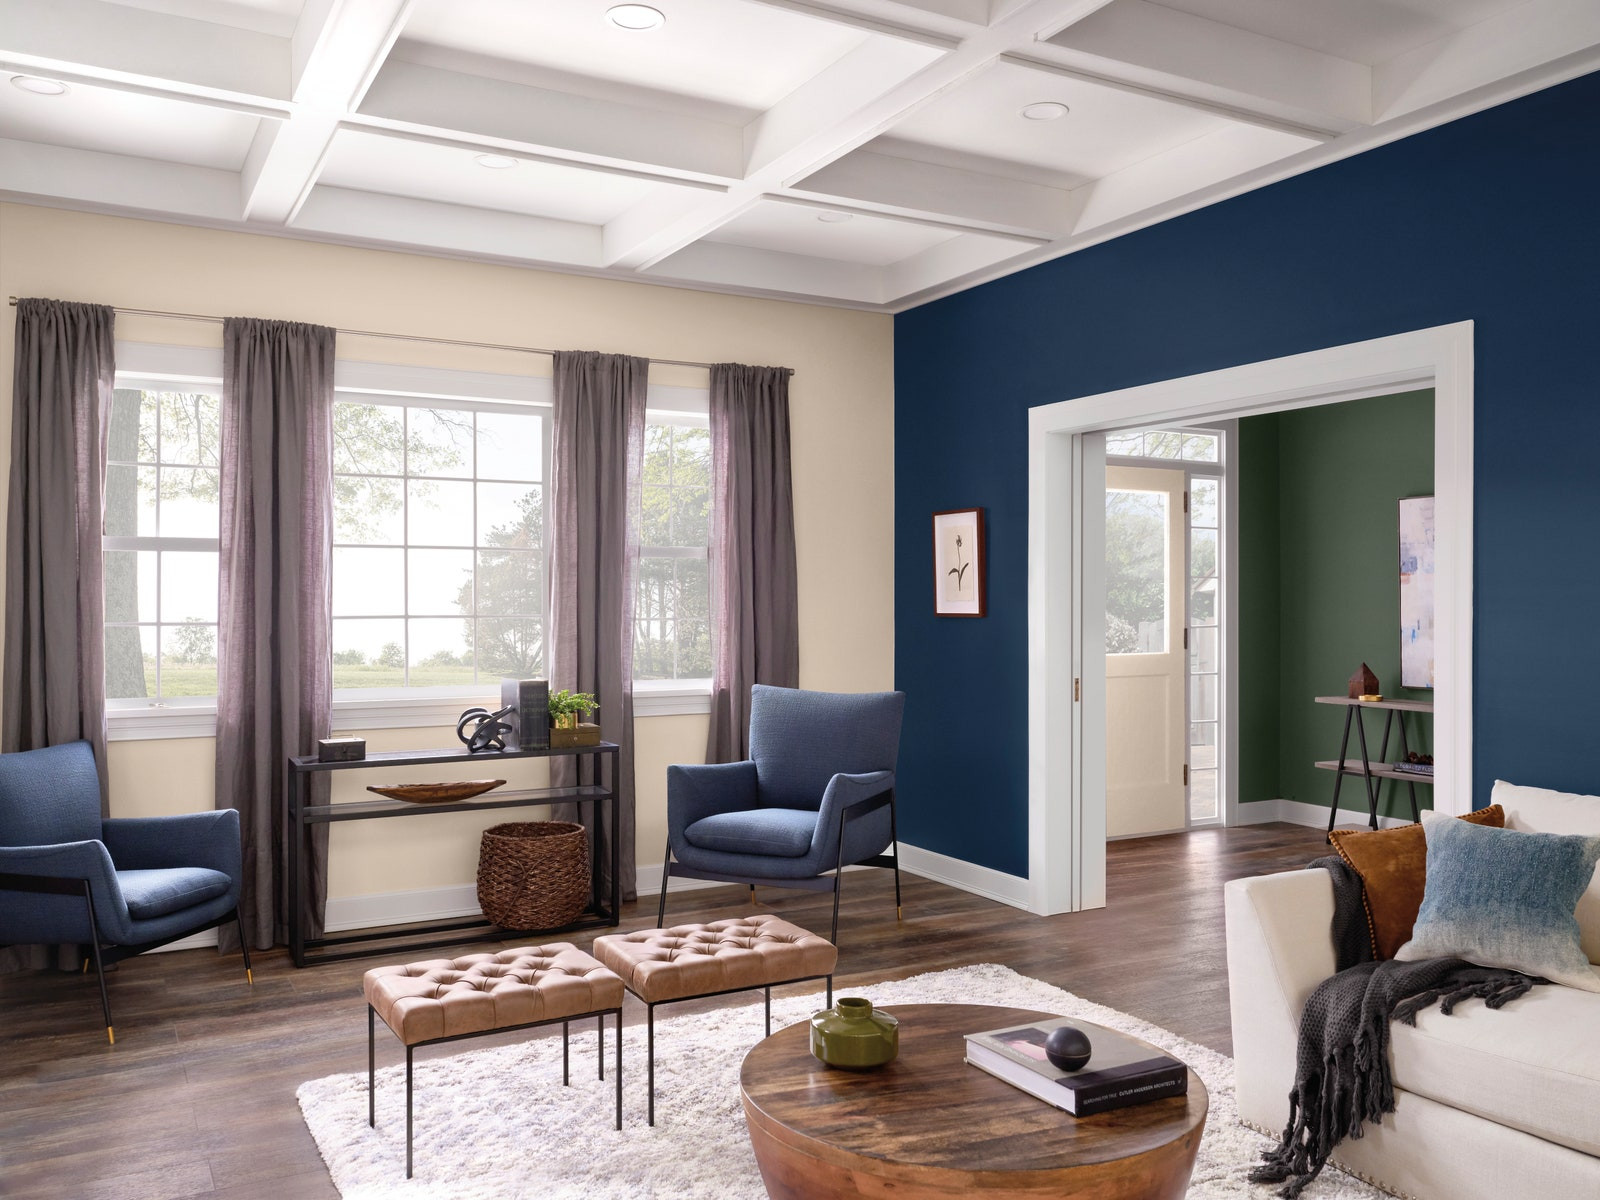 Latest Living Room Paint Colors
 The Color Trends We’ll Be Seeing in 2020 According to